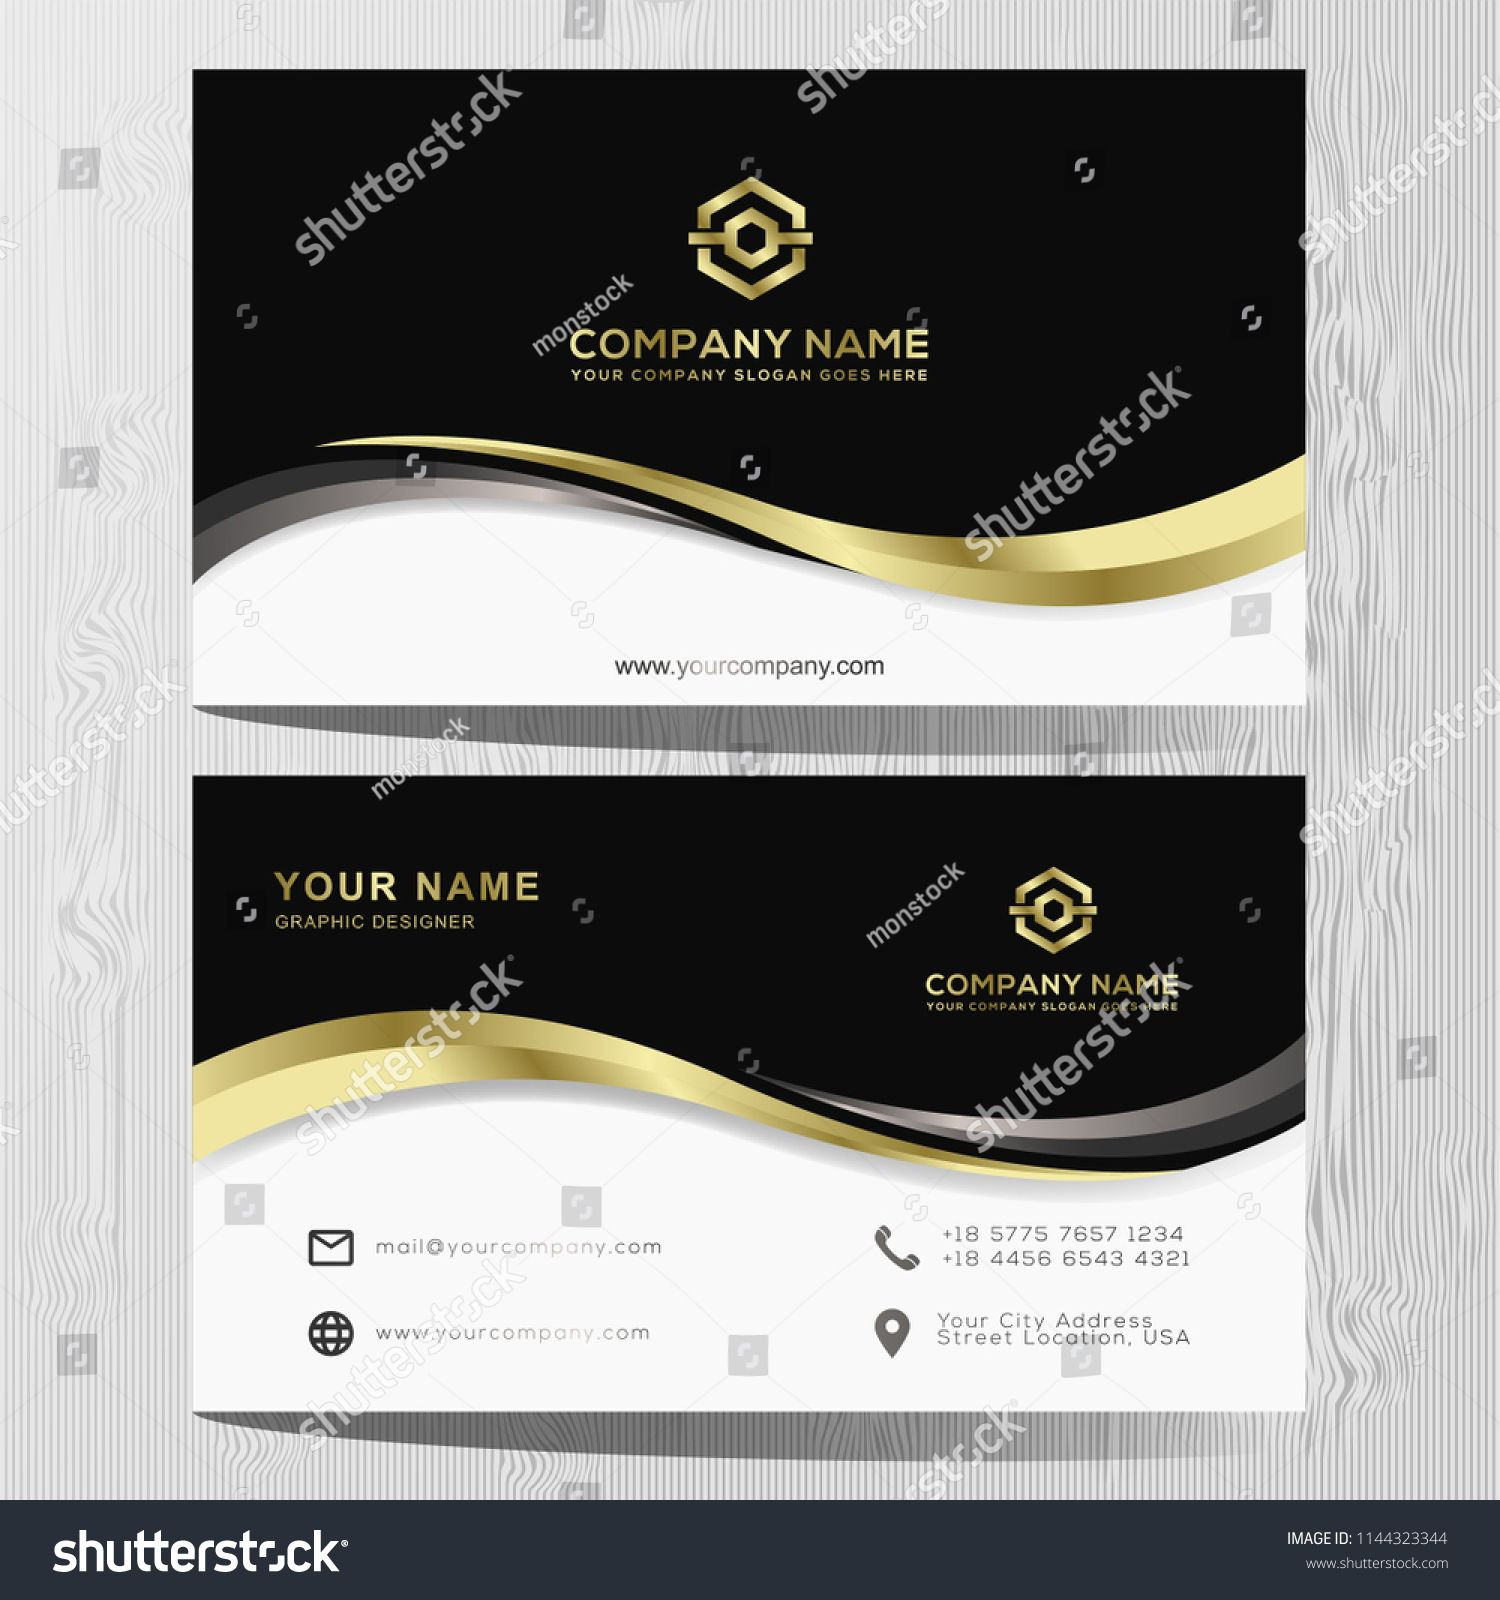 Luxury and Elegant Black Gold Business Cards Template On Of Business Cards Templates Free Online